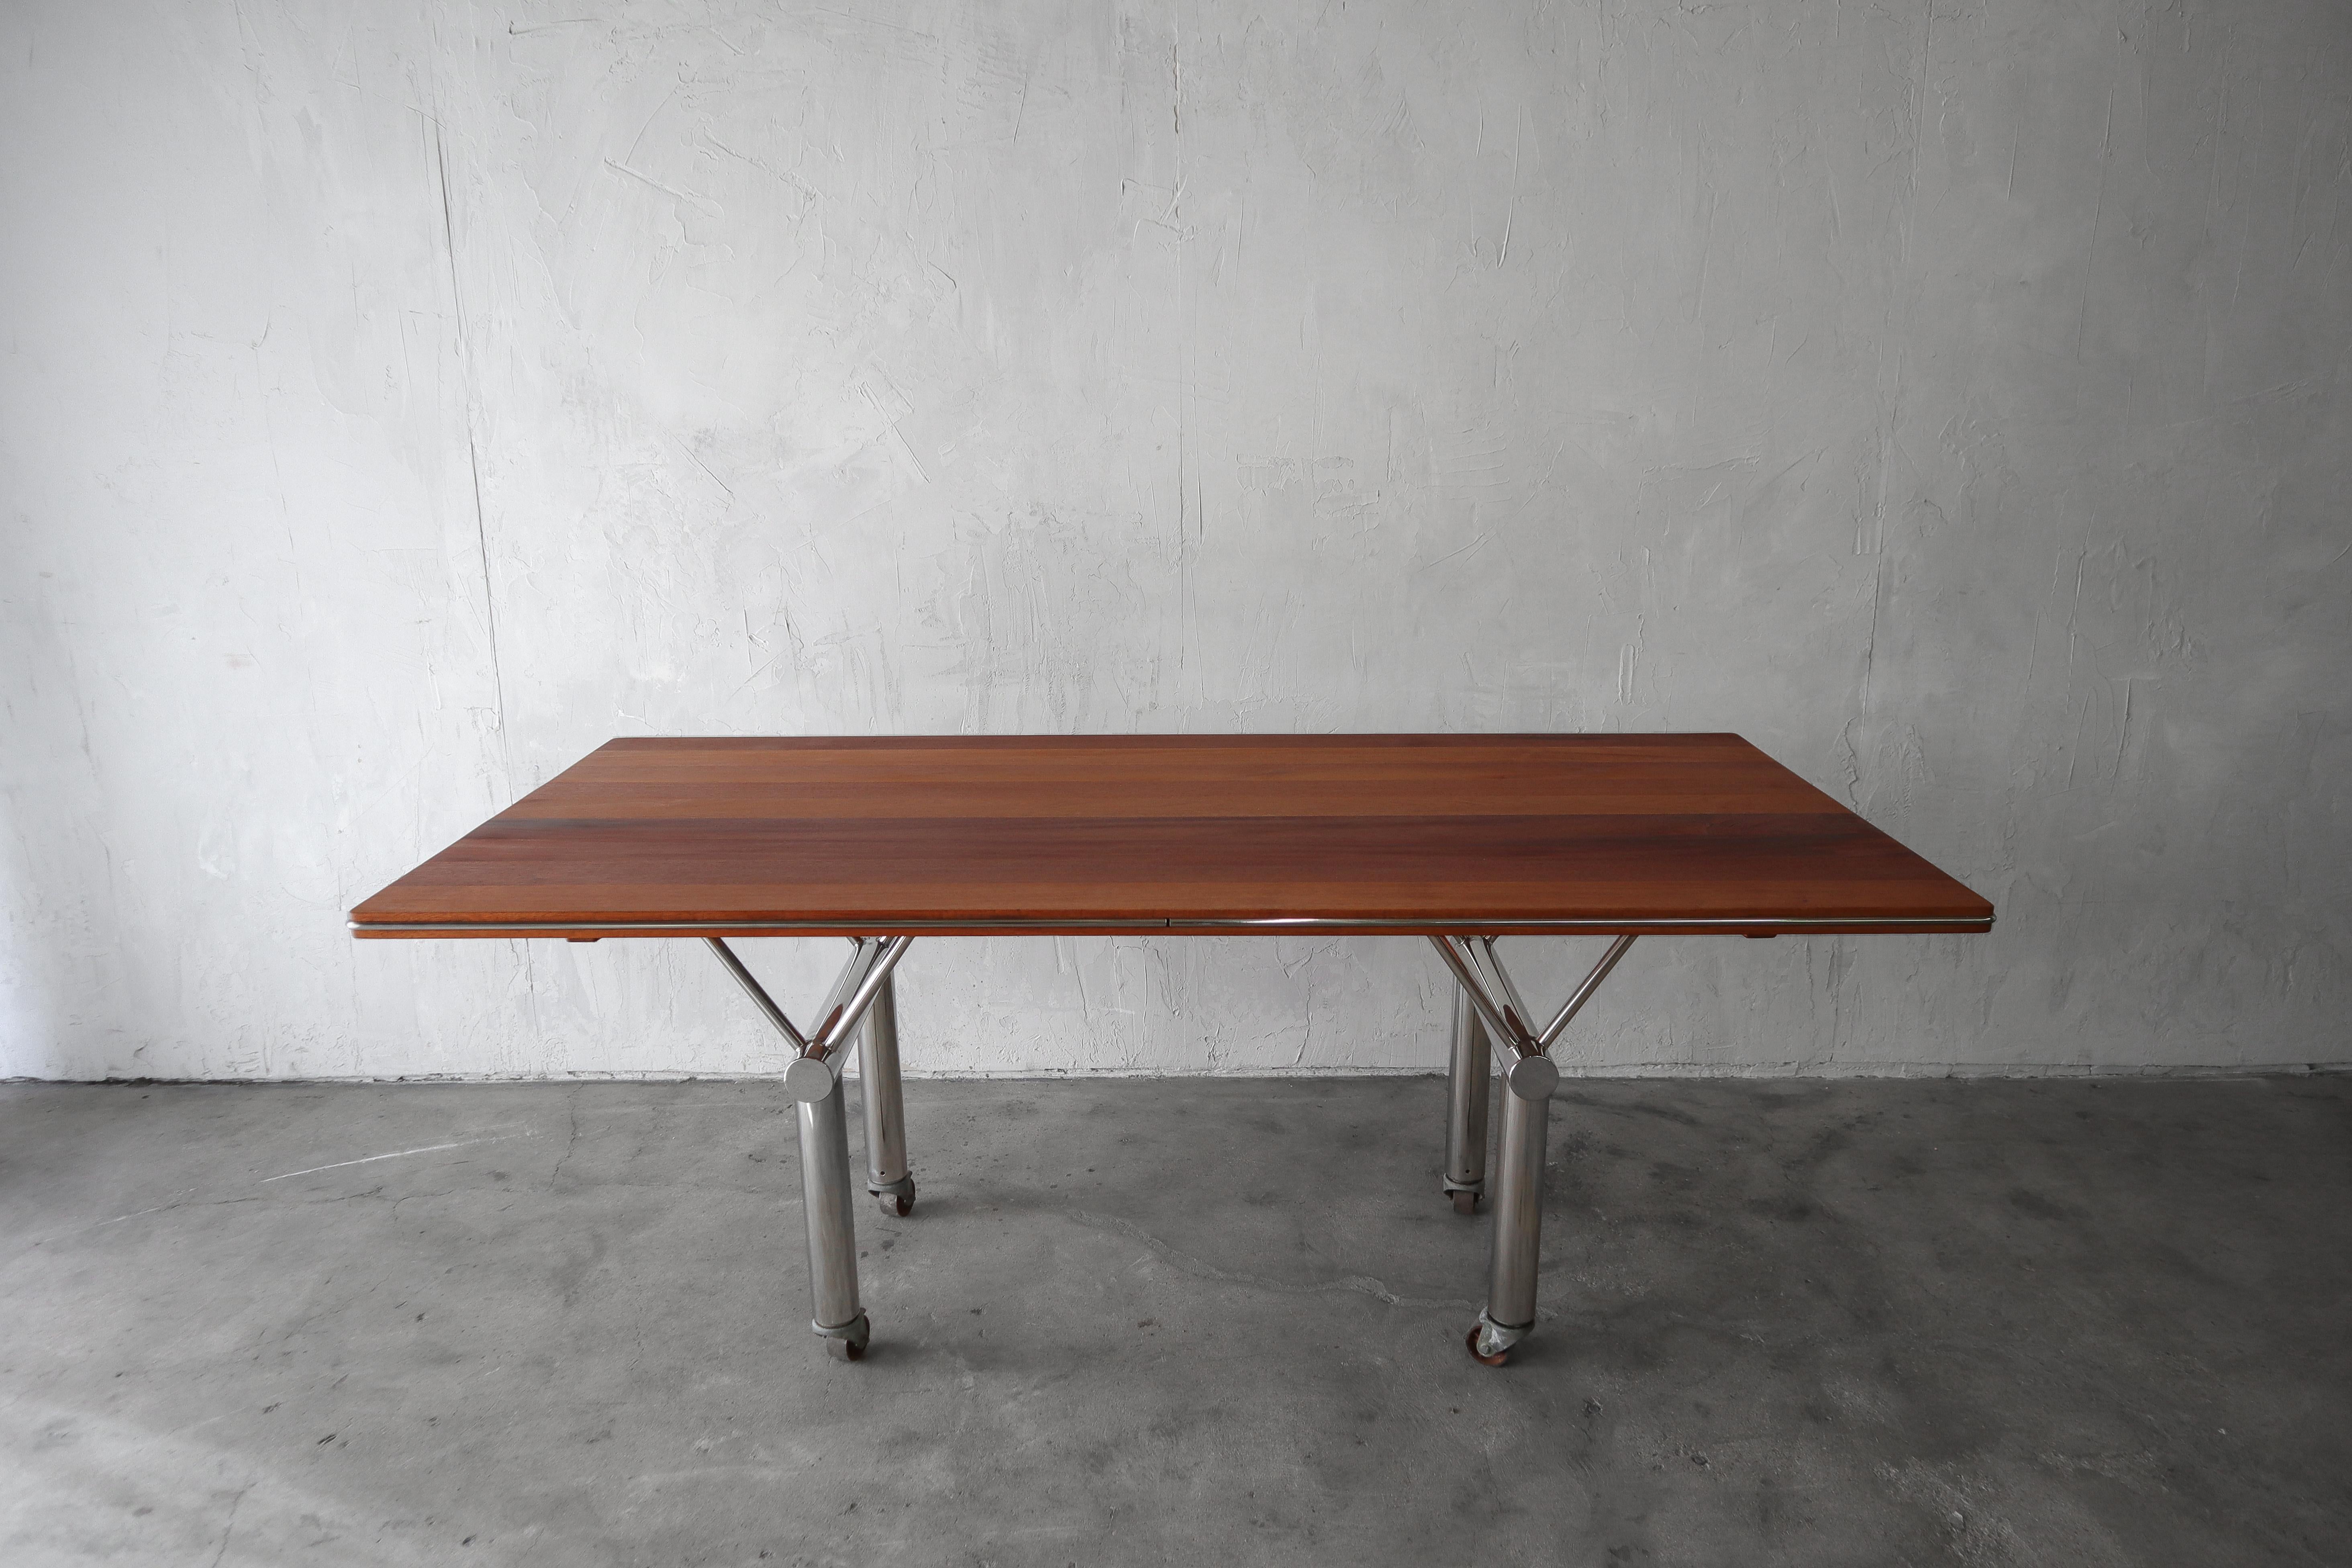 PRICE IS FOR 2 TABLES.  

Gorgeous pair of custom made tables, designed and made for an architectural design firm in Santa Monica in the 1960s.

The tables feature beautiful, solid mahogany plank tops in varying shades and grains set atop Y-shaped